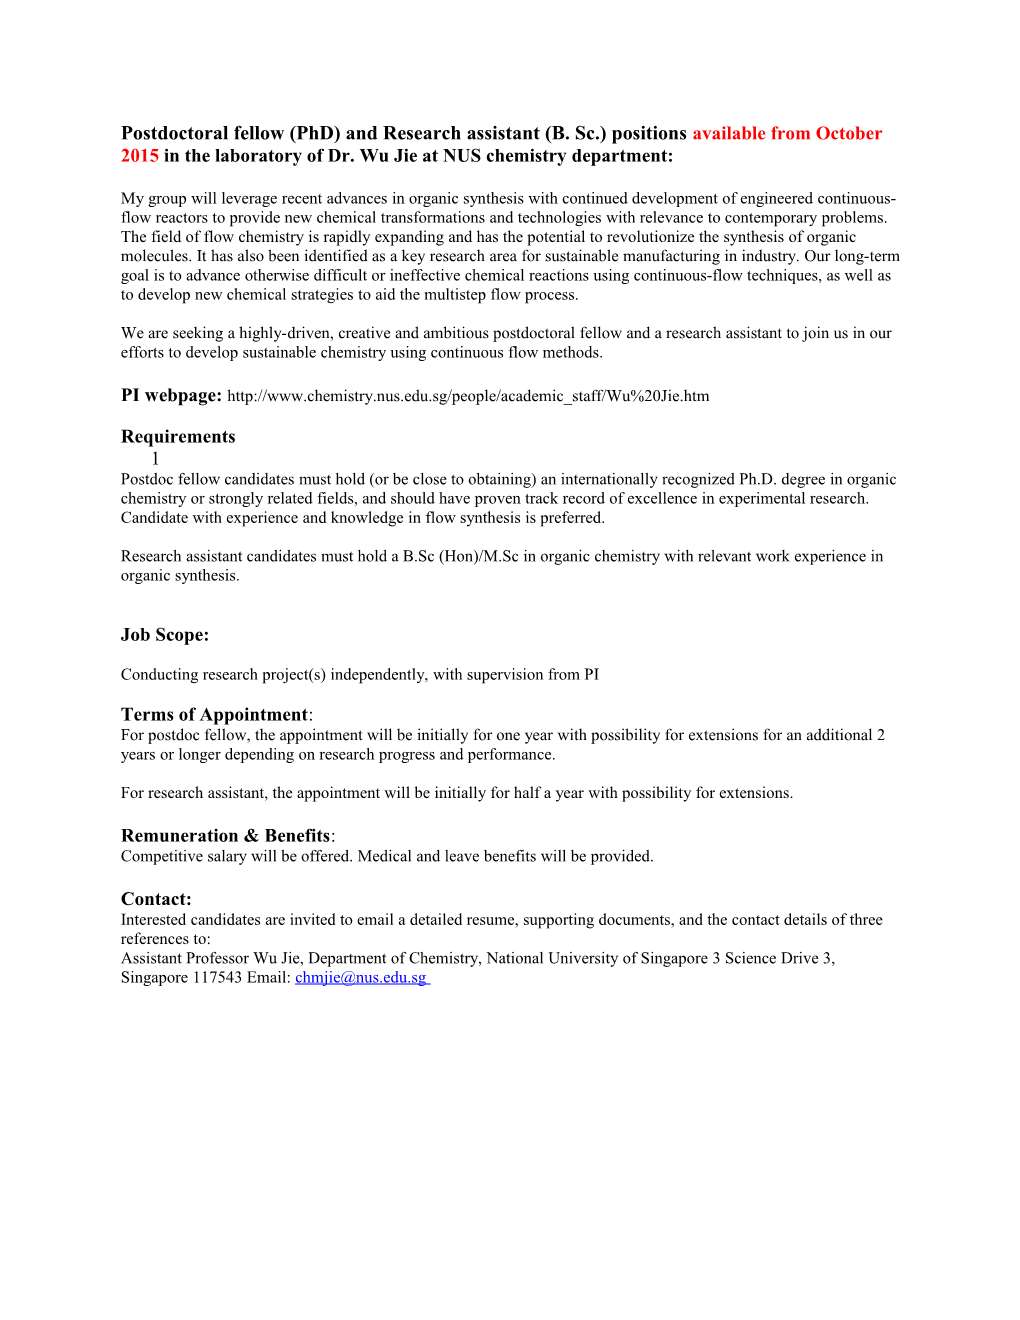 Postdoctoral Fellow (Phd) and Research Assistant (B. Sc.) Positionsavailable from October